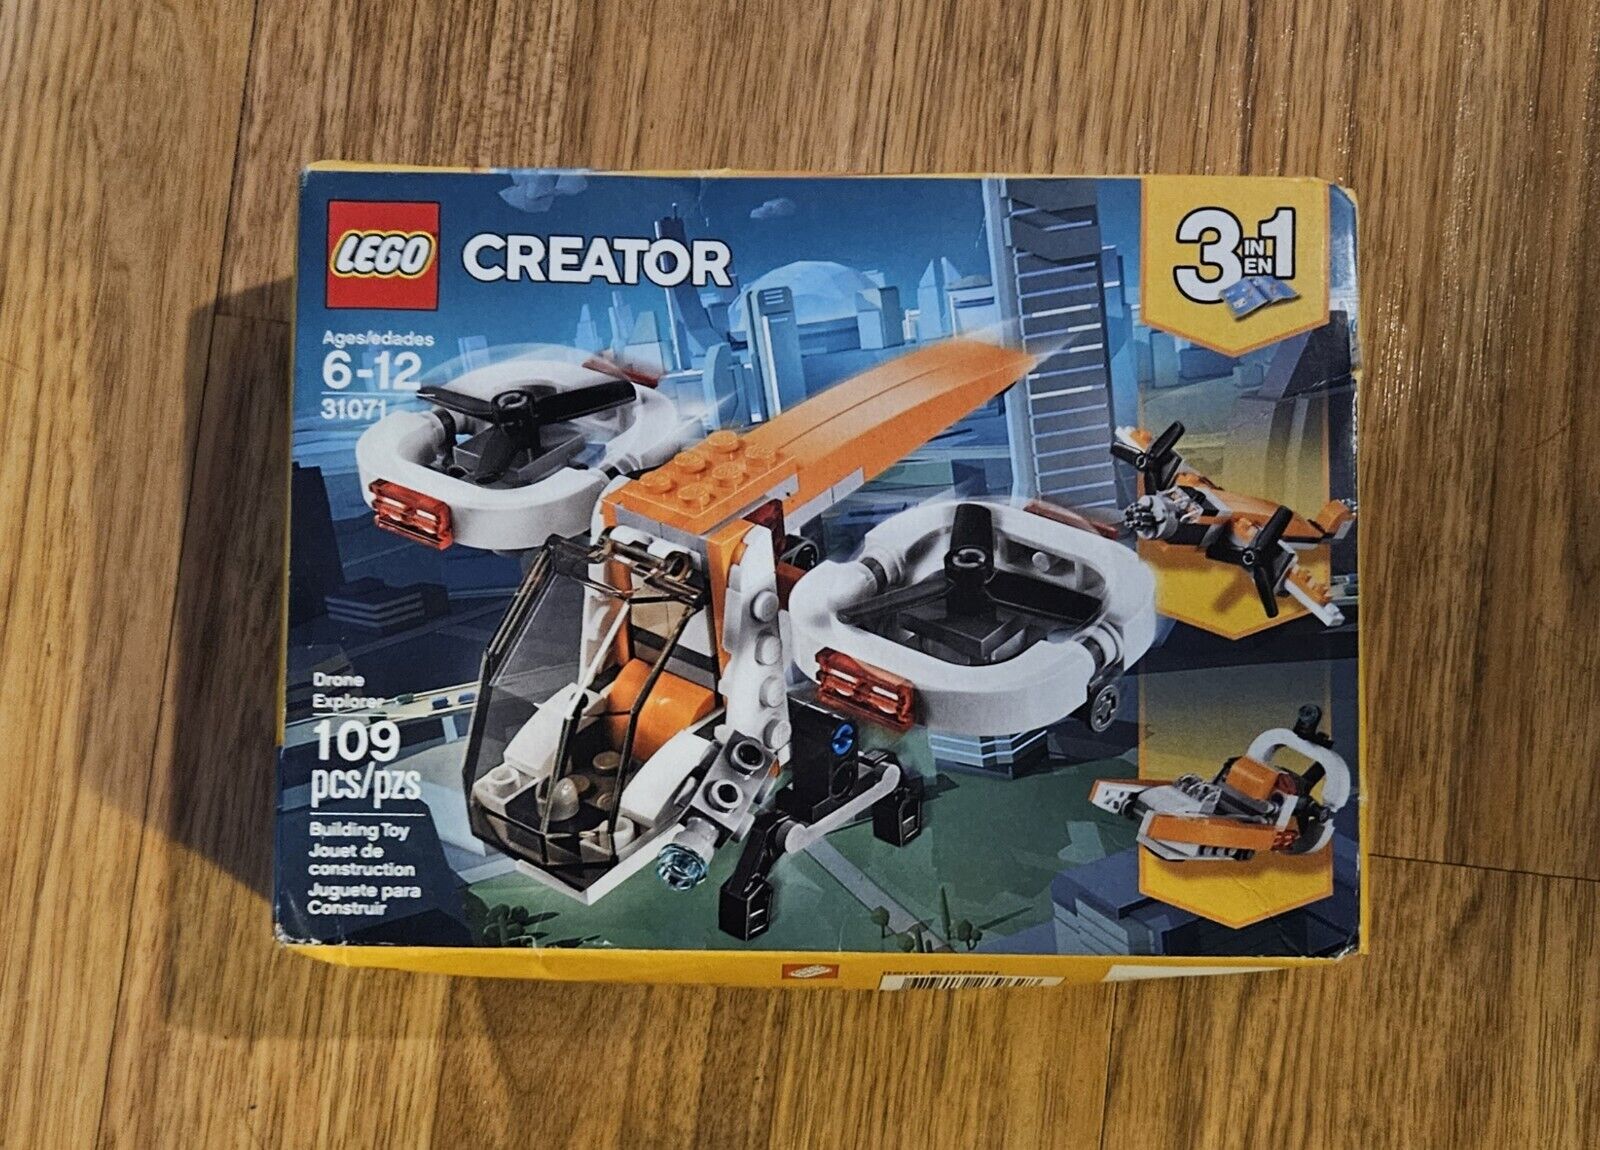 Lego Creator Sets Lot Of 3 Retired Sets New and Sealed